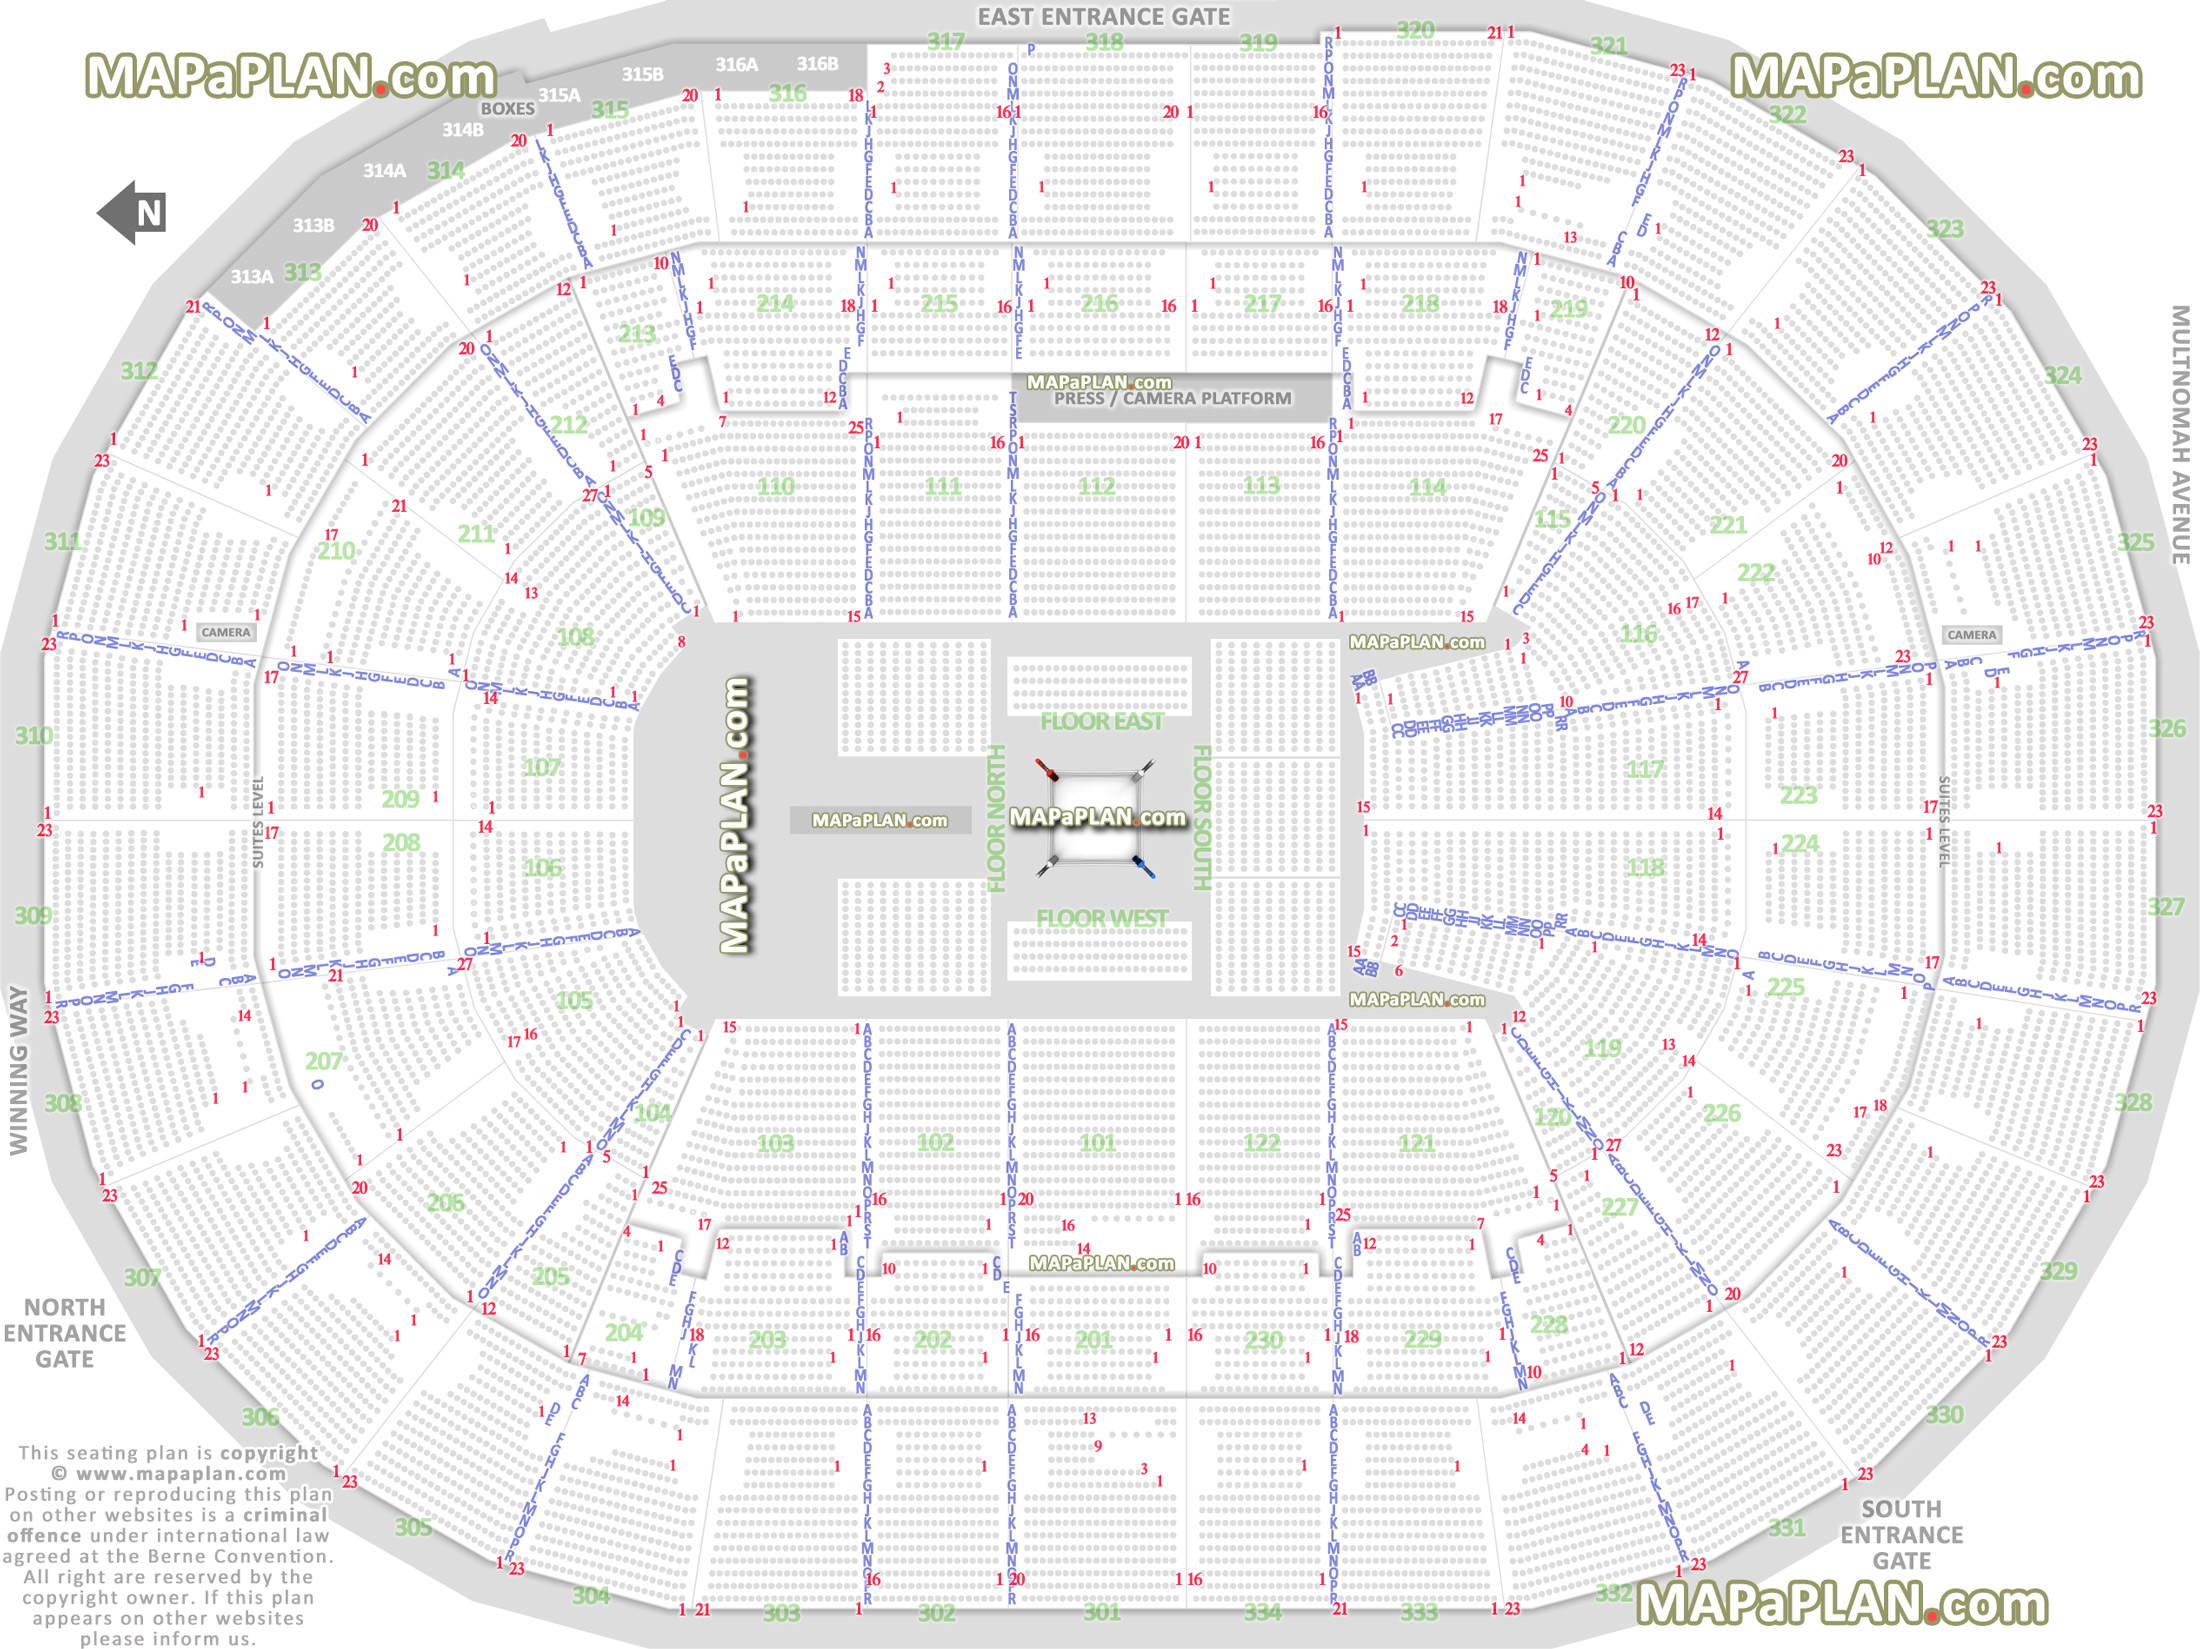 wwe raw smackdown live wrestling boxing match events 360 round ring stage configuration good bad worst seats executive hospitality rental suites level Portland Moda Center seating chart